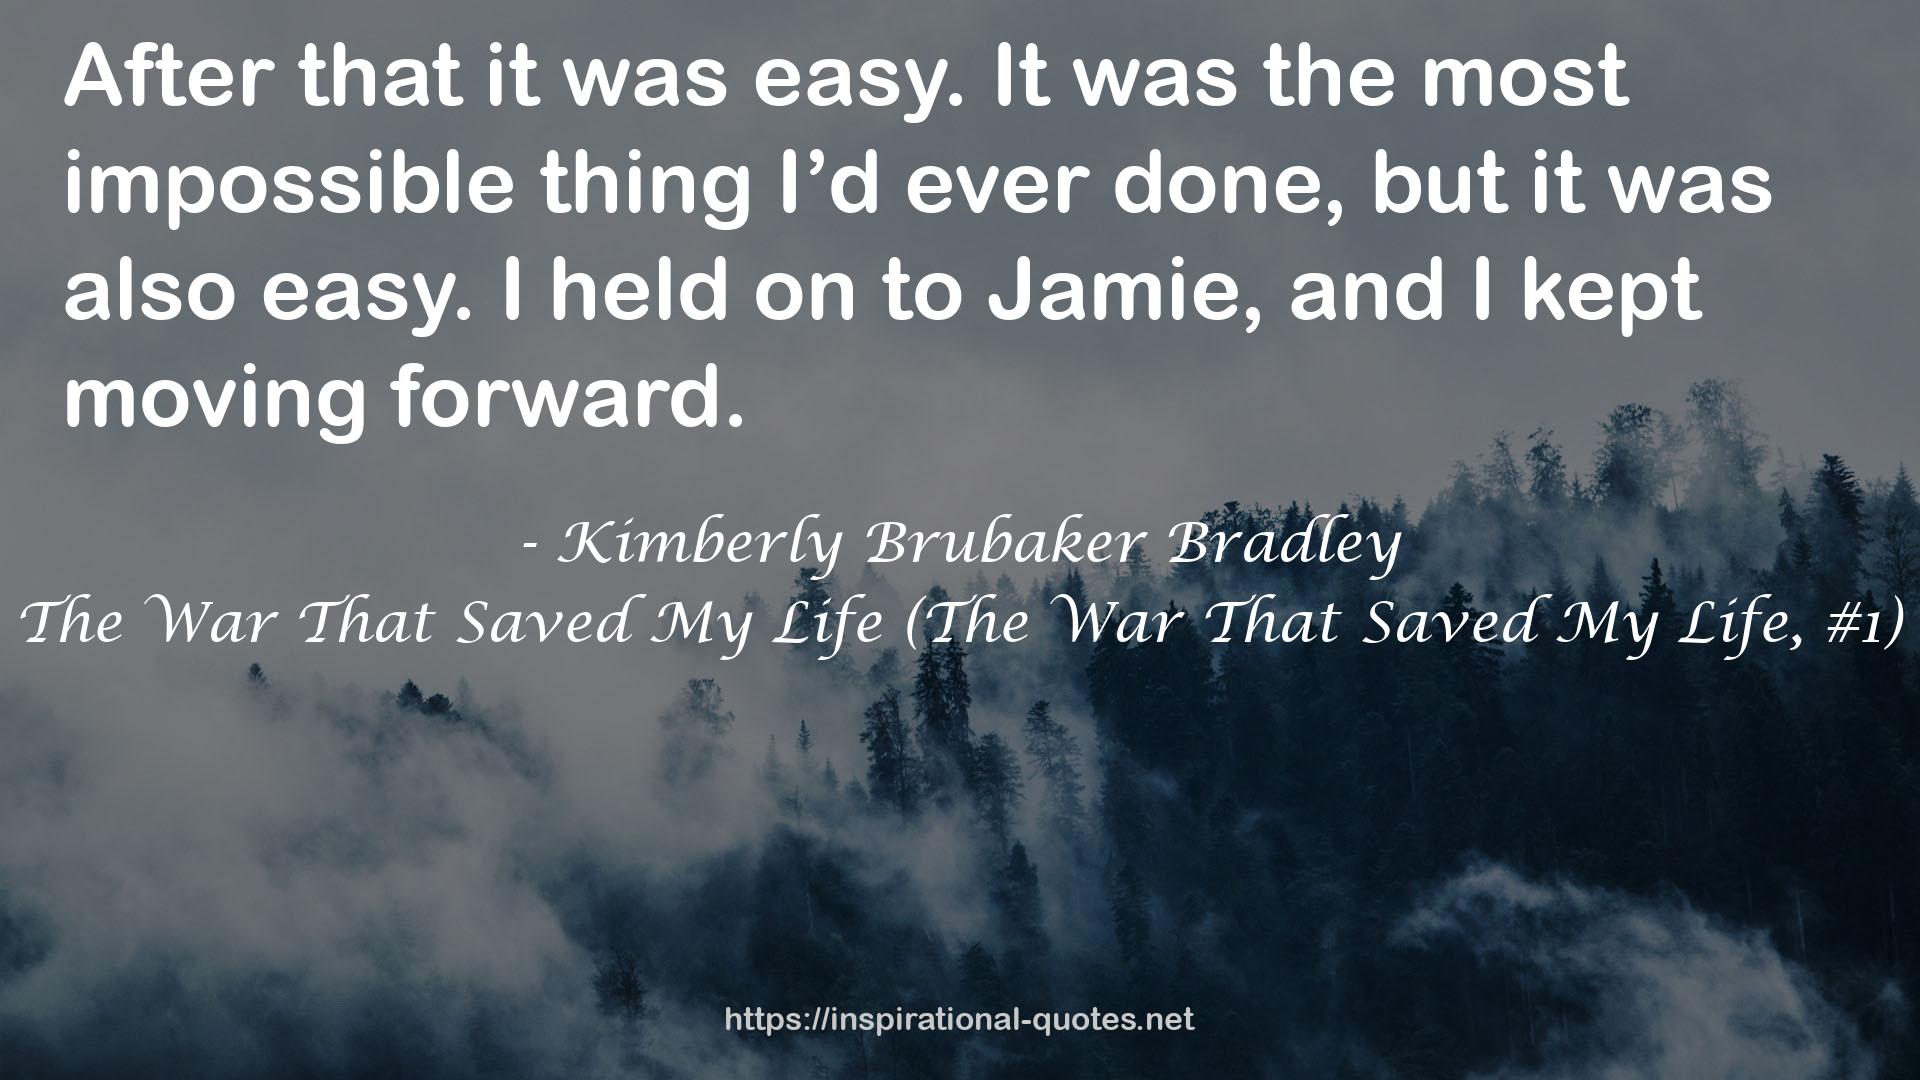 The War That Saved My Life (The War That Saved My Life, #1) QUOTES